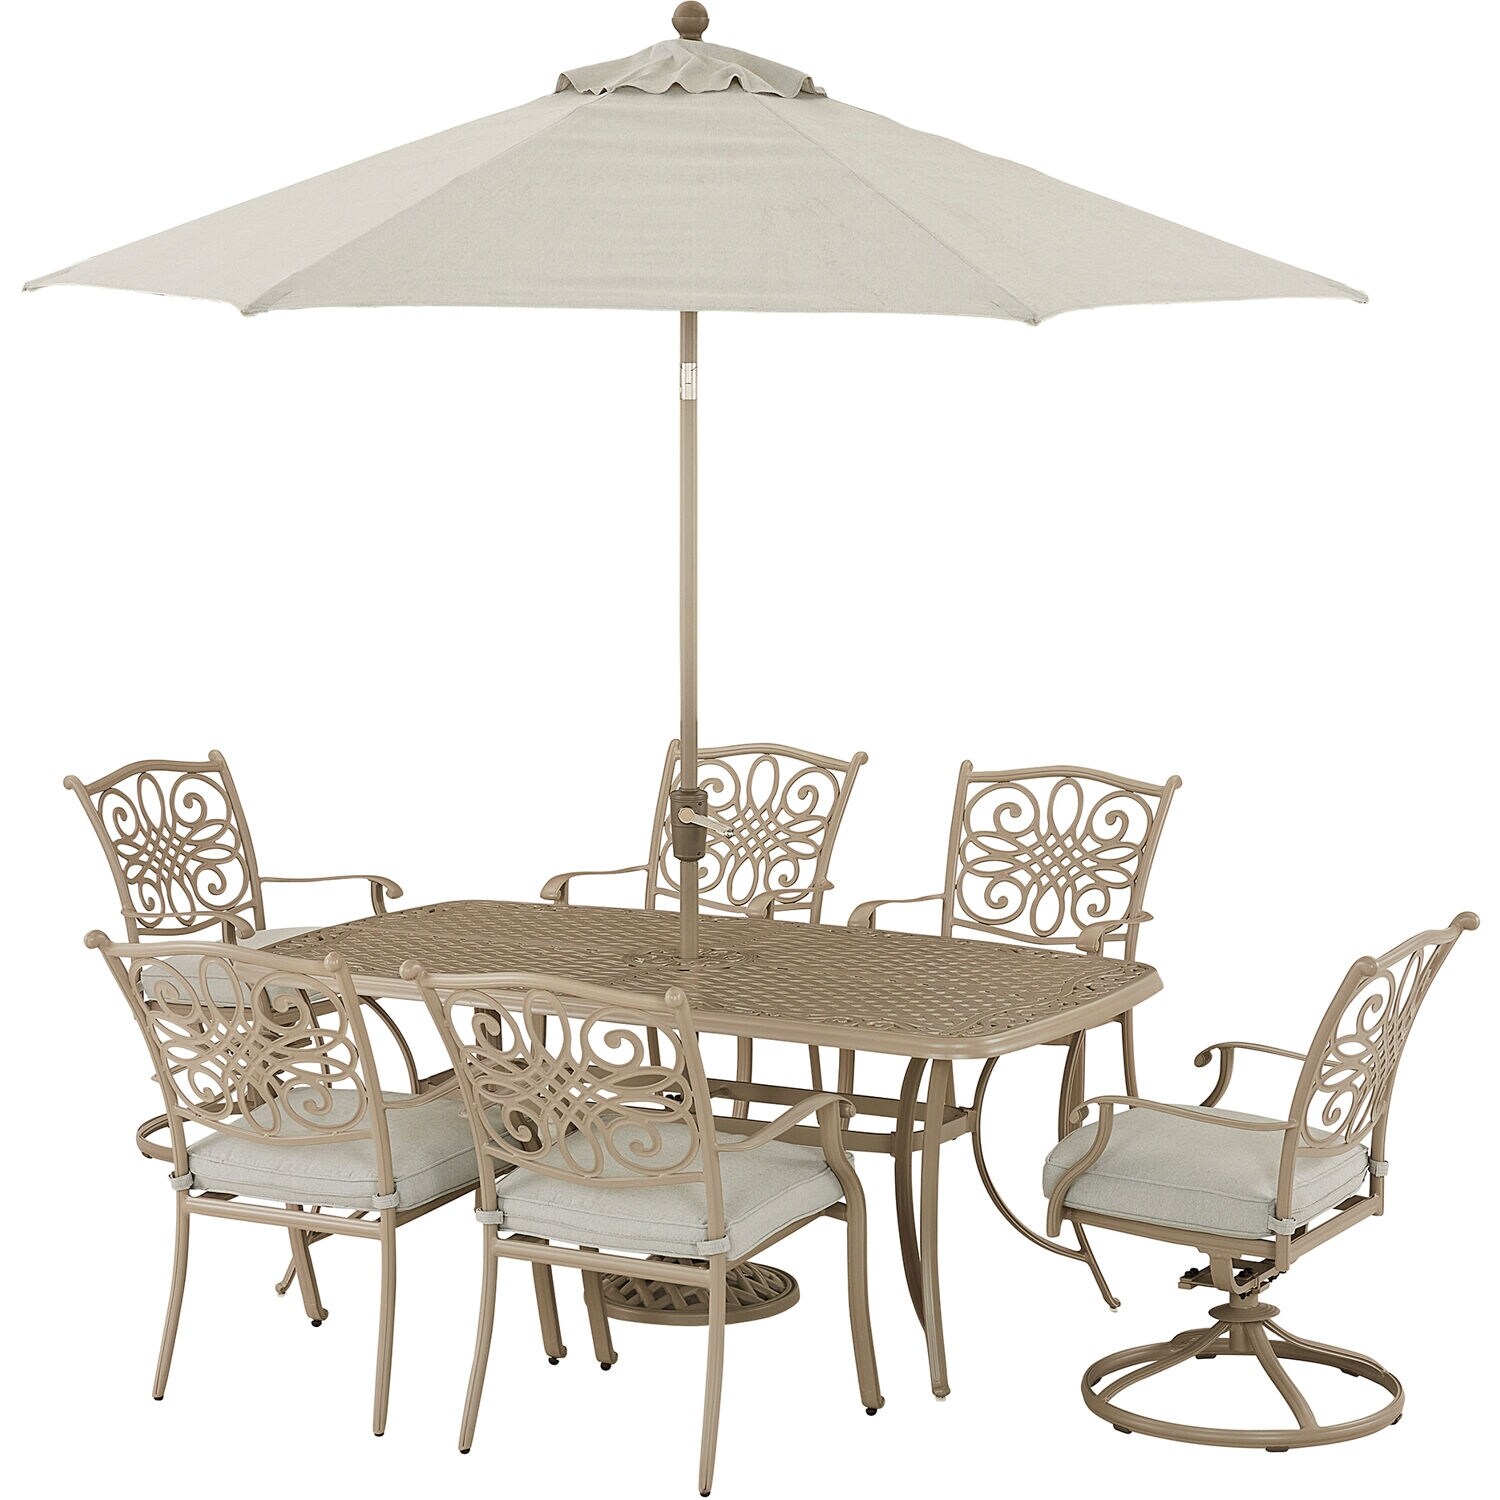 Hanover Traditions 7-piece Set With 4 Dining Chairs  2 Swivel Rockers  38-in. X 72-in. Table  9-ft. Umbrella  And Stand  Sand